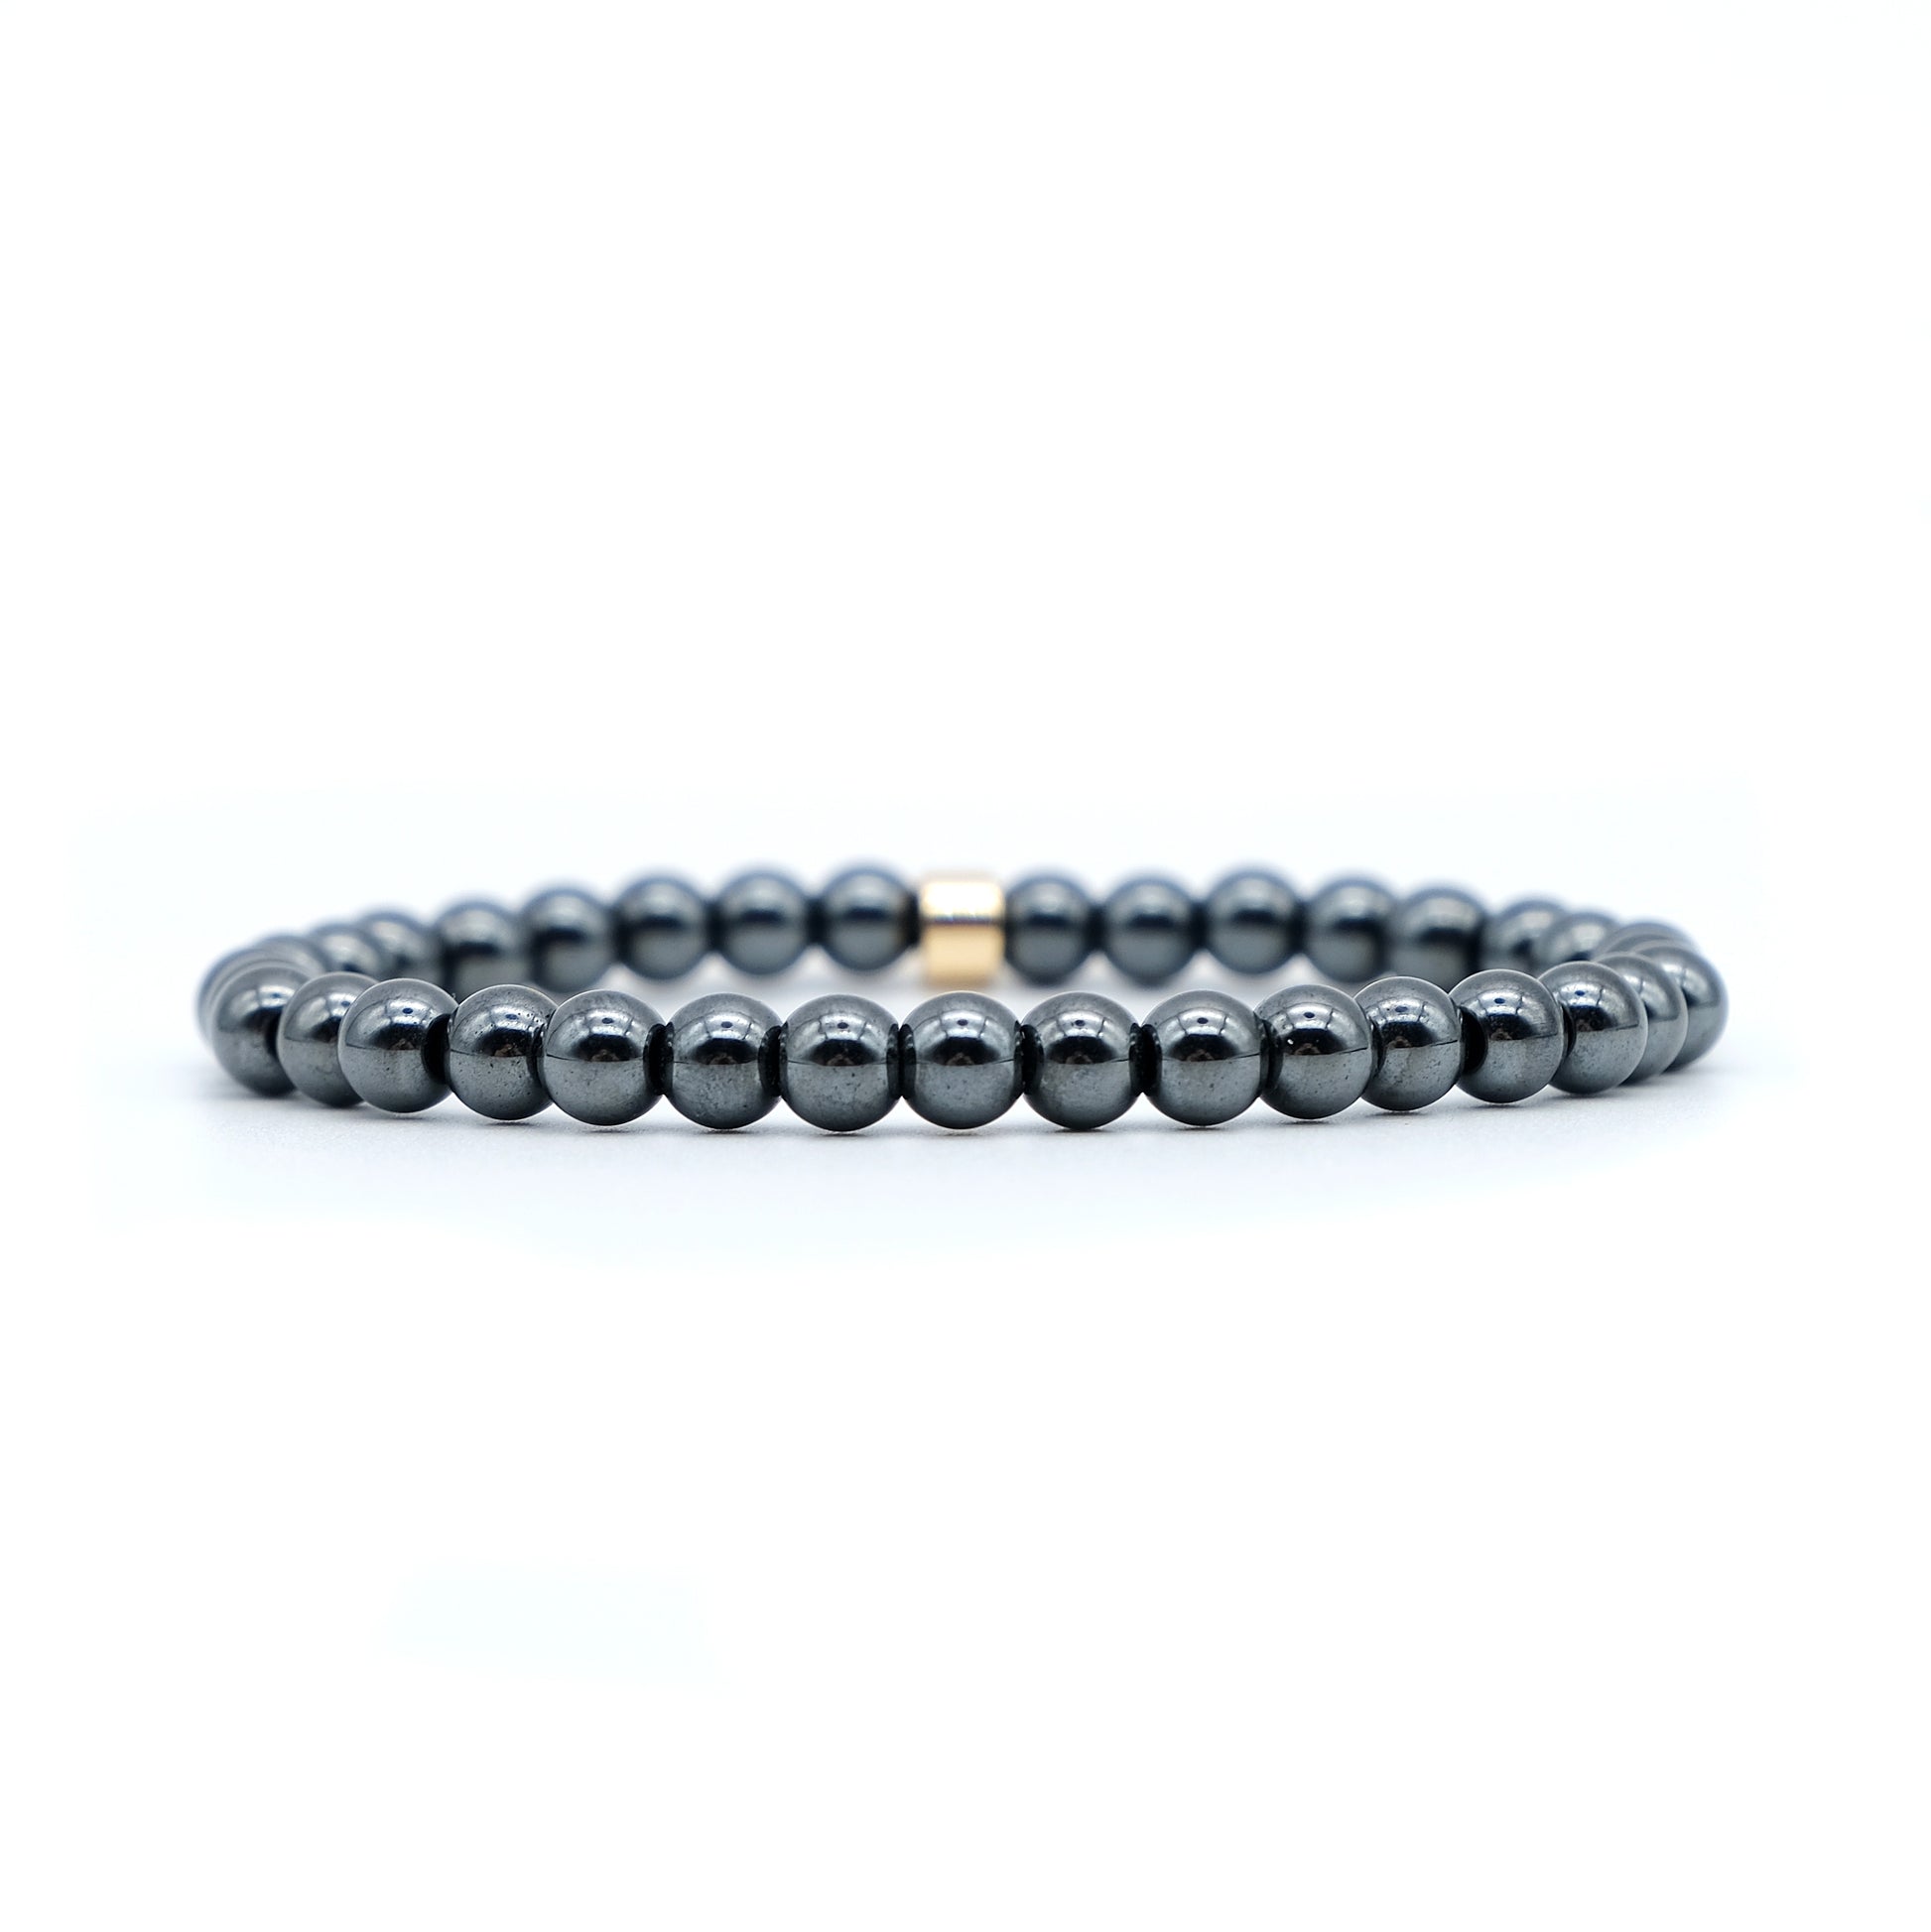 Hematite gemstone bracelet in 6mm beads with gold accessory